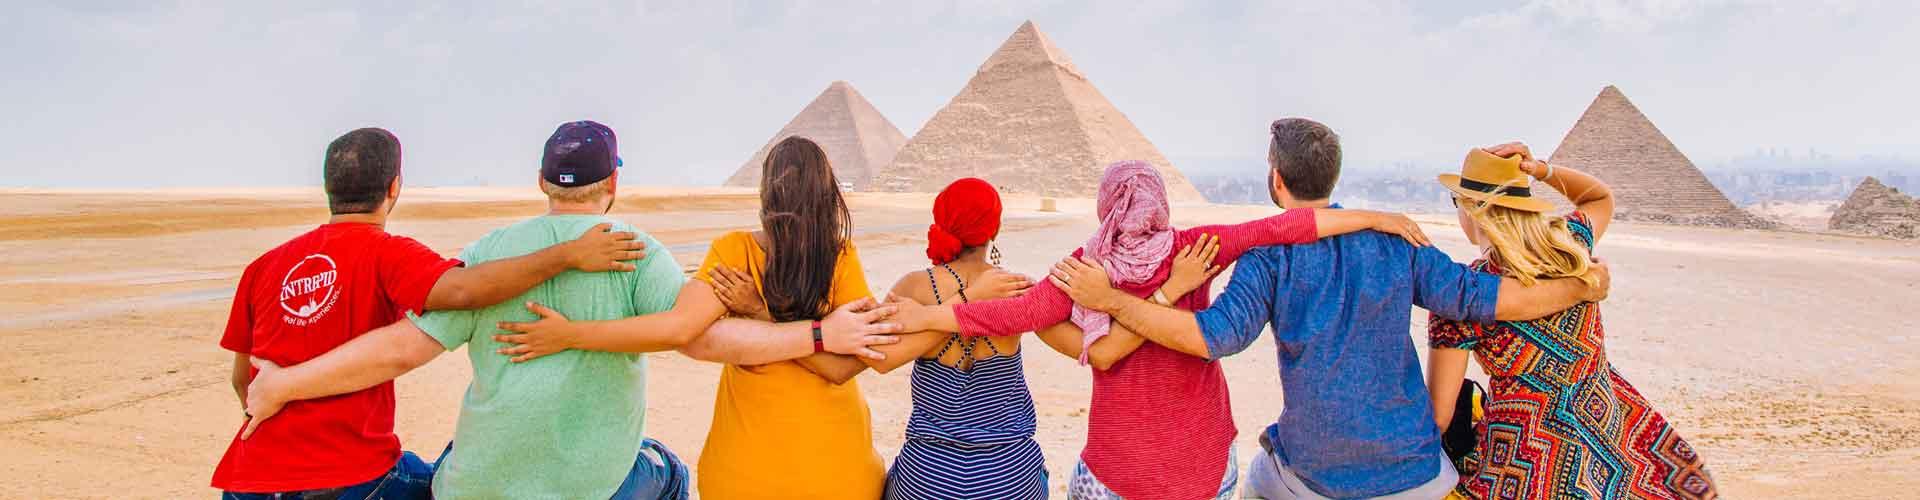 Group of travellers marvel at the pyramids in Cairo